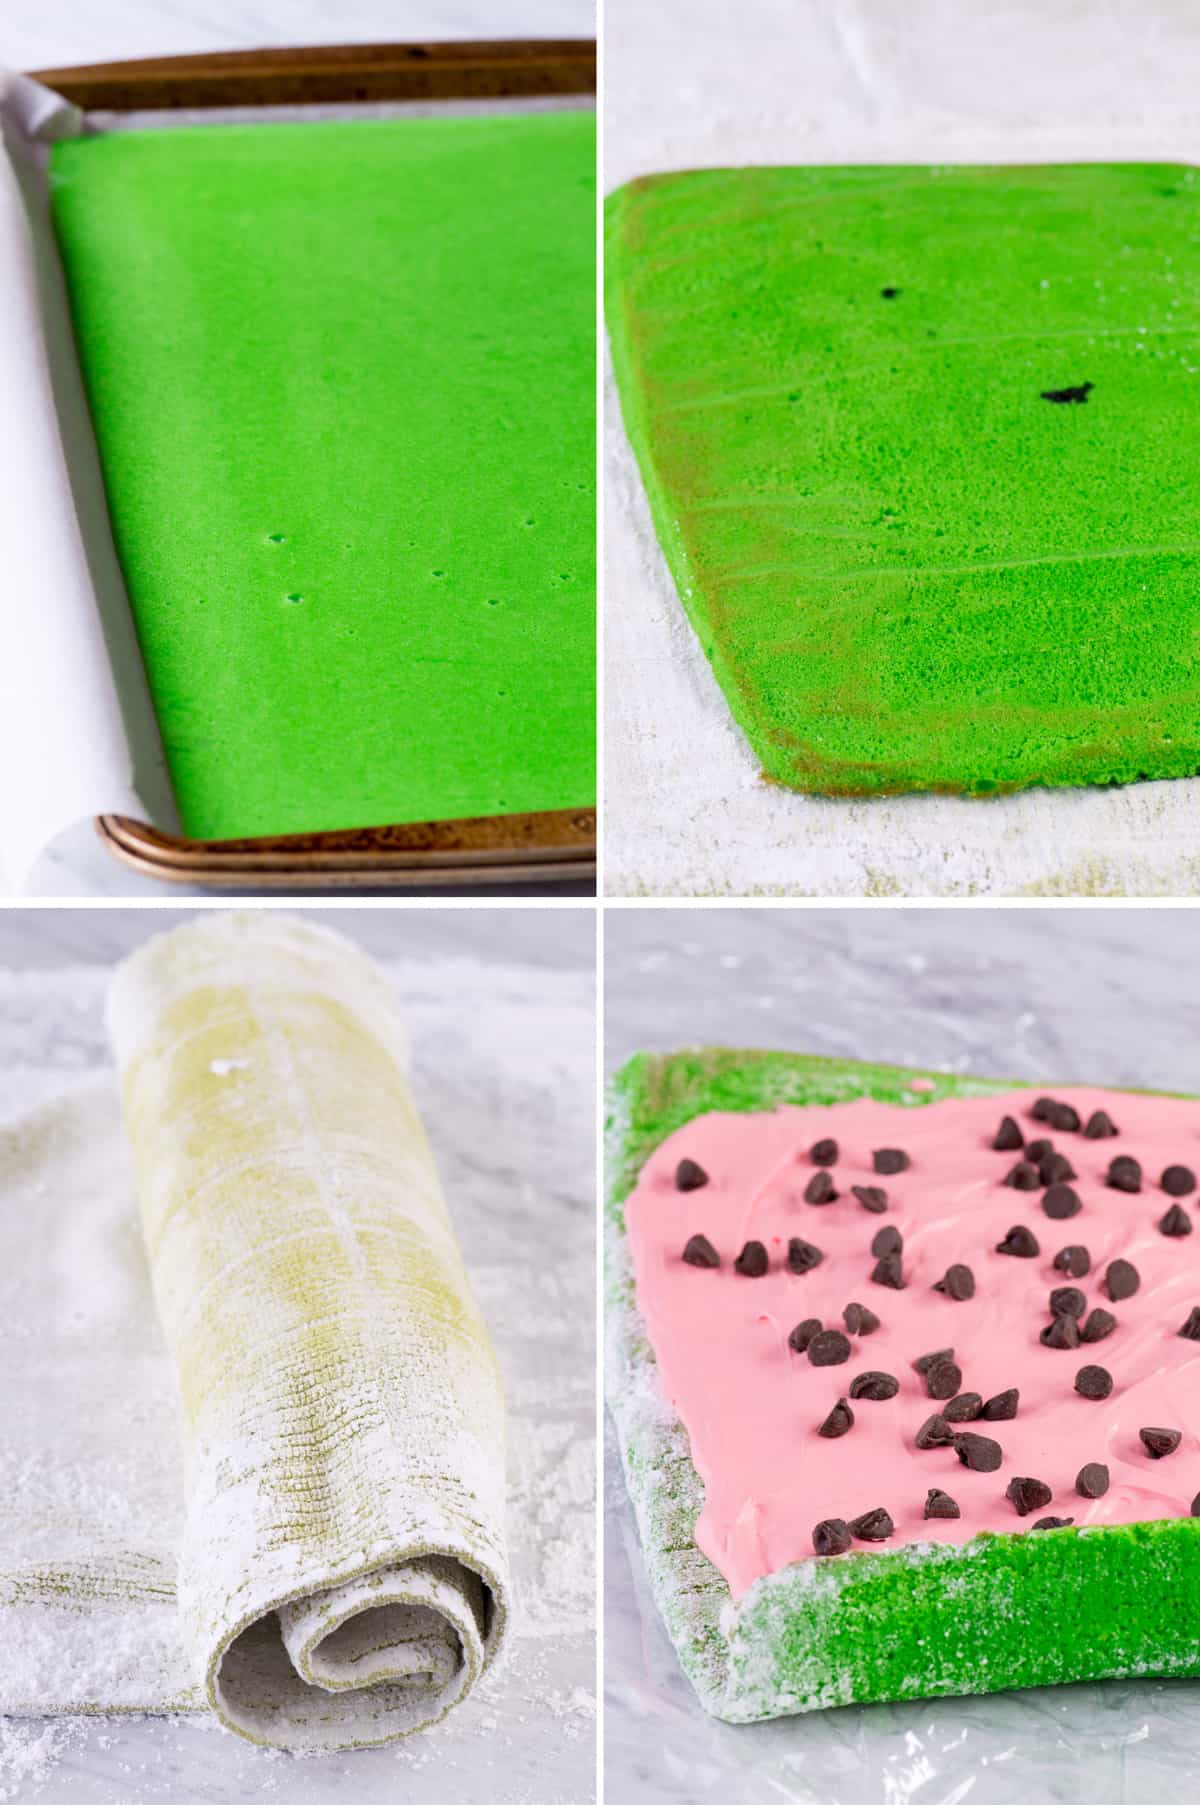 green cake roll with pink filling and chocolate chips to look like a watermelon cake roll